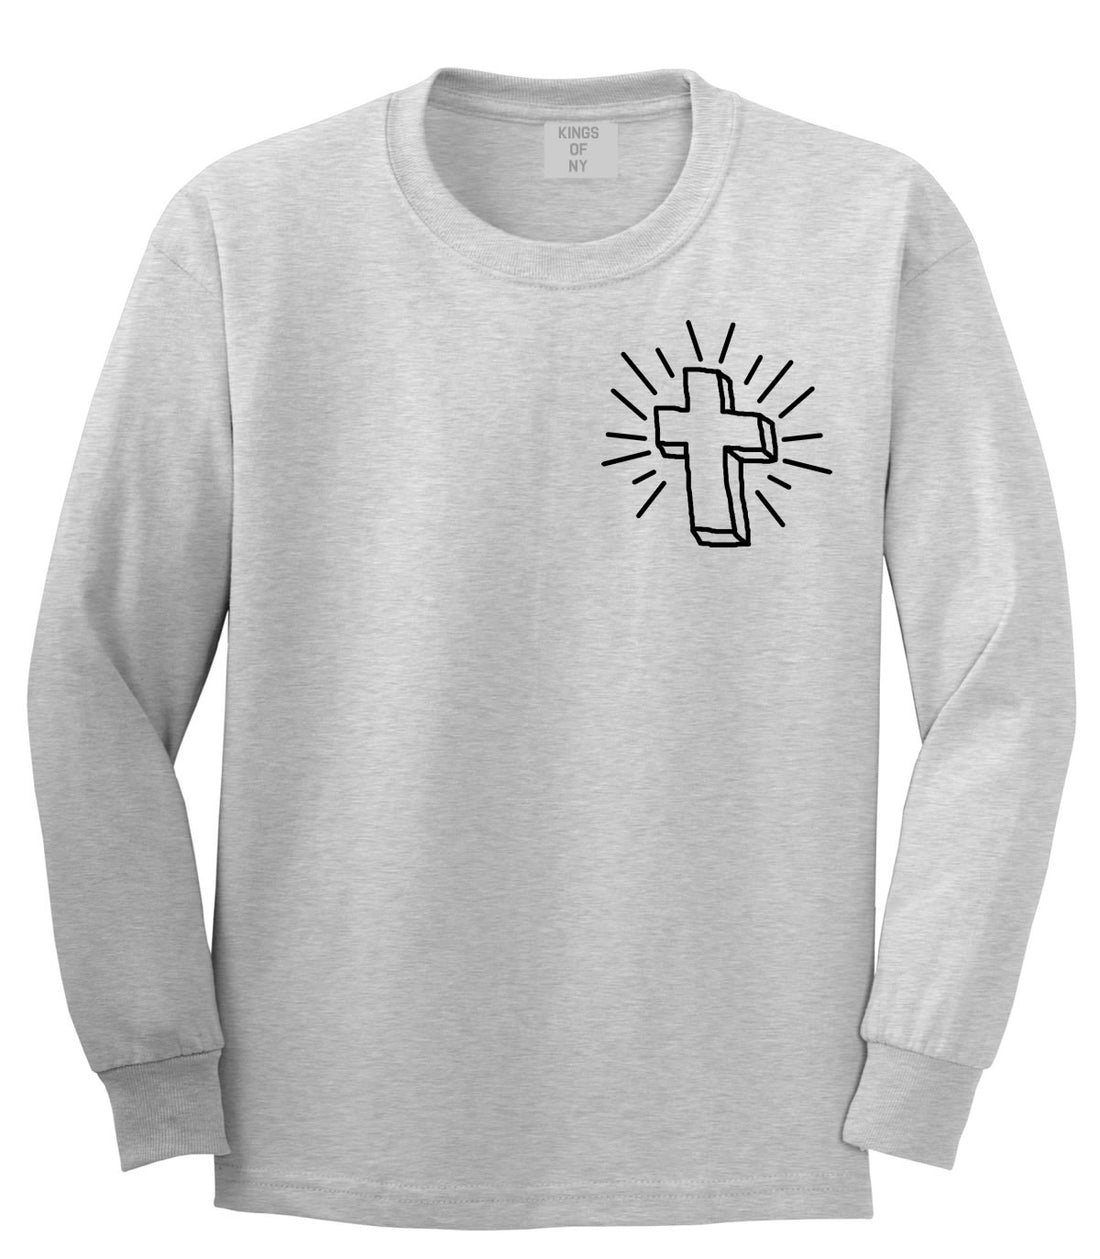 Cross of Praise Chest God Religious Long Sleeve T-Shirt in Grey By Kings Of NY